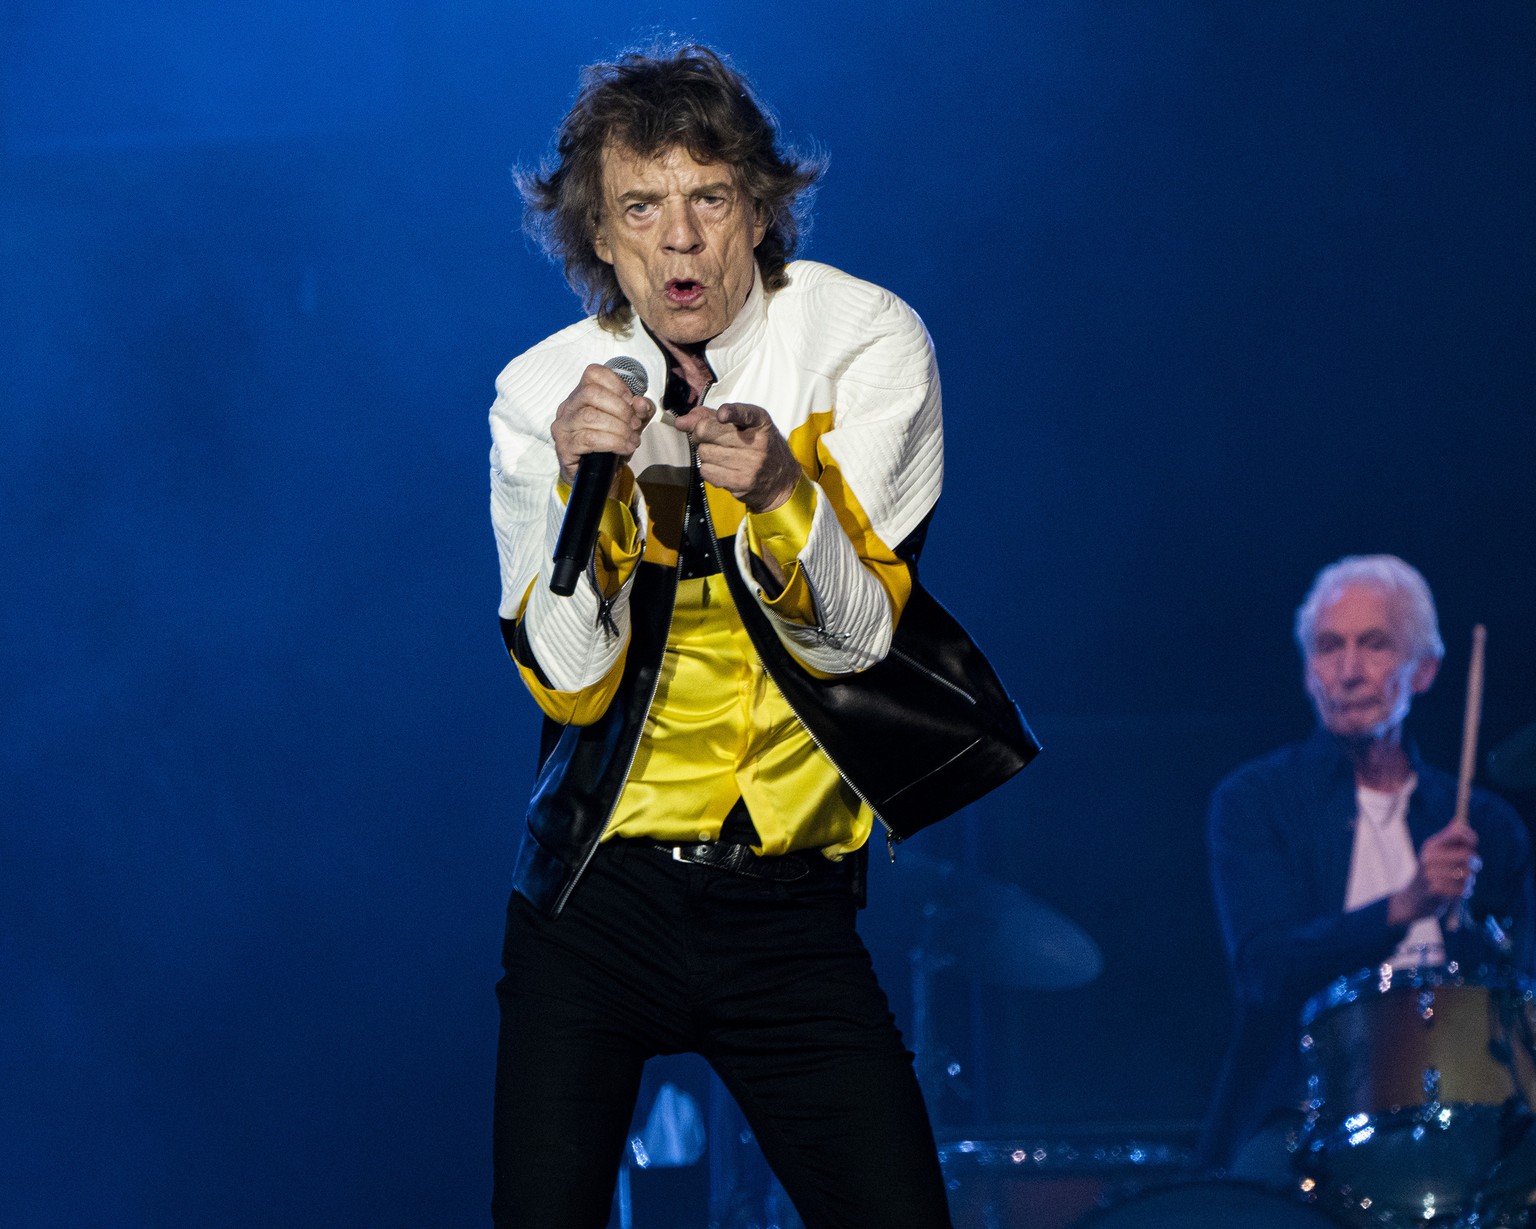 Lead vocalist Mick Jagger and drummer Charlie Watts of The Rolling Stones perform with the band during their No Filter Tour at Gillette Stadium on Sunday, July 7, 2019, in Foxborough, Mass. (Photo by  ...